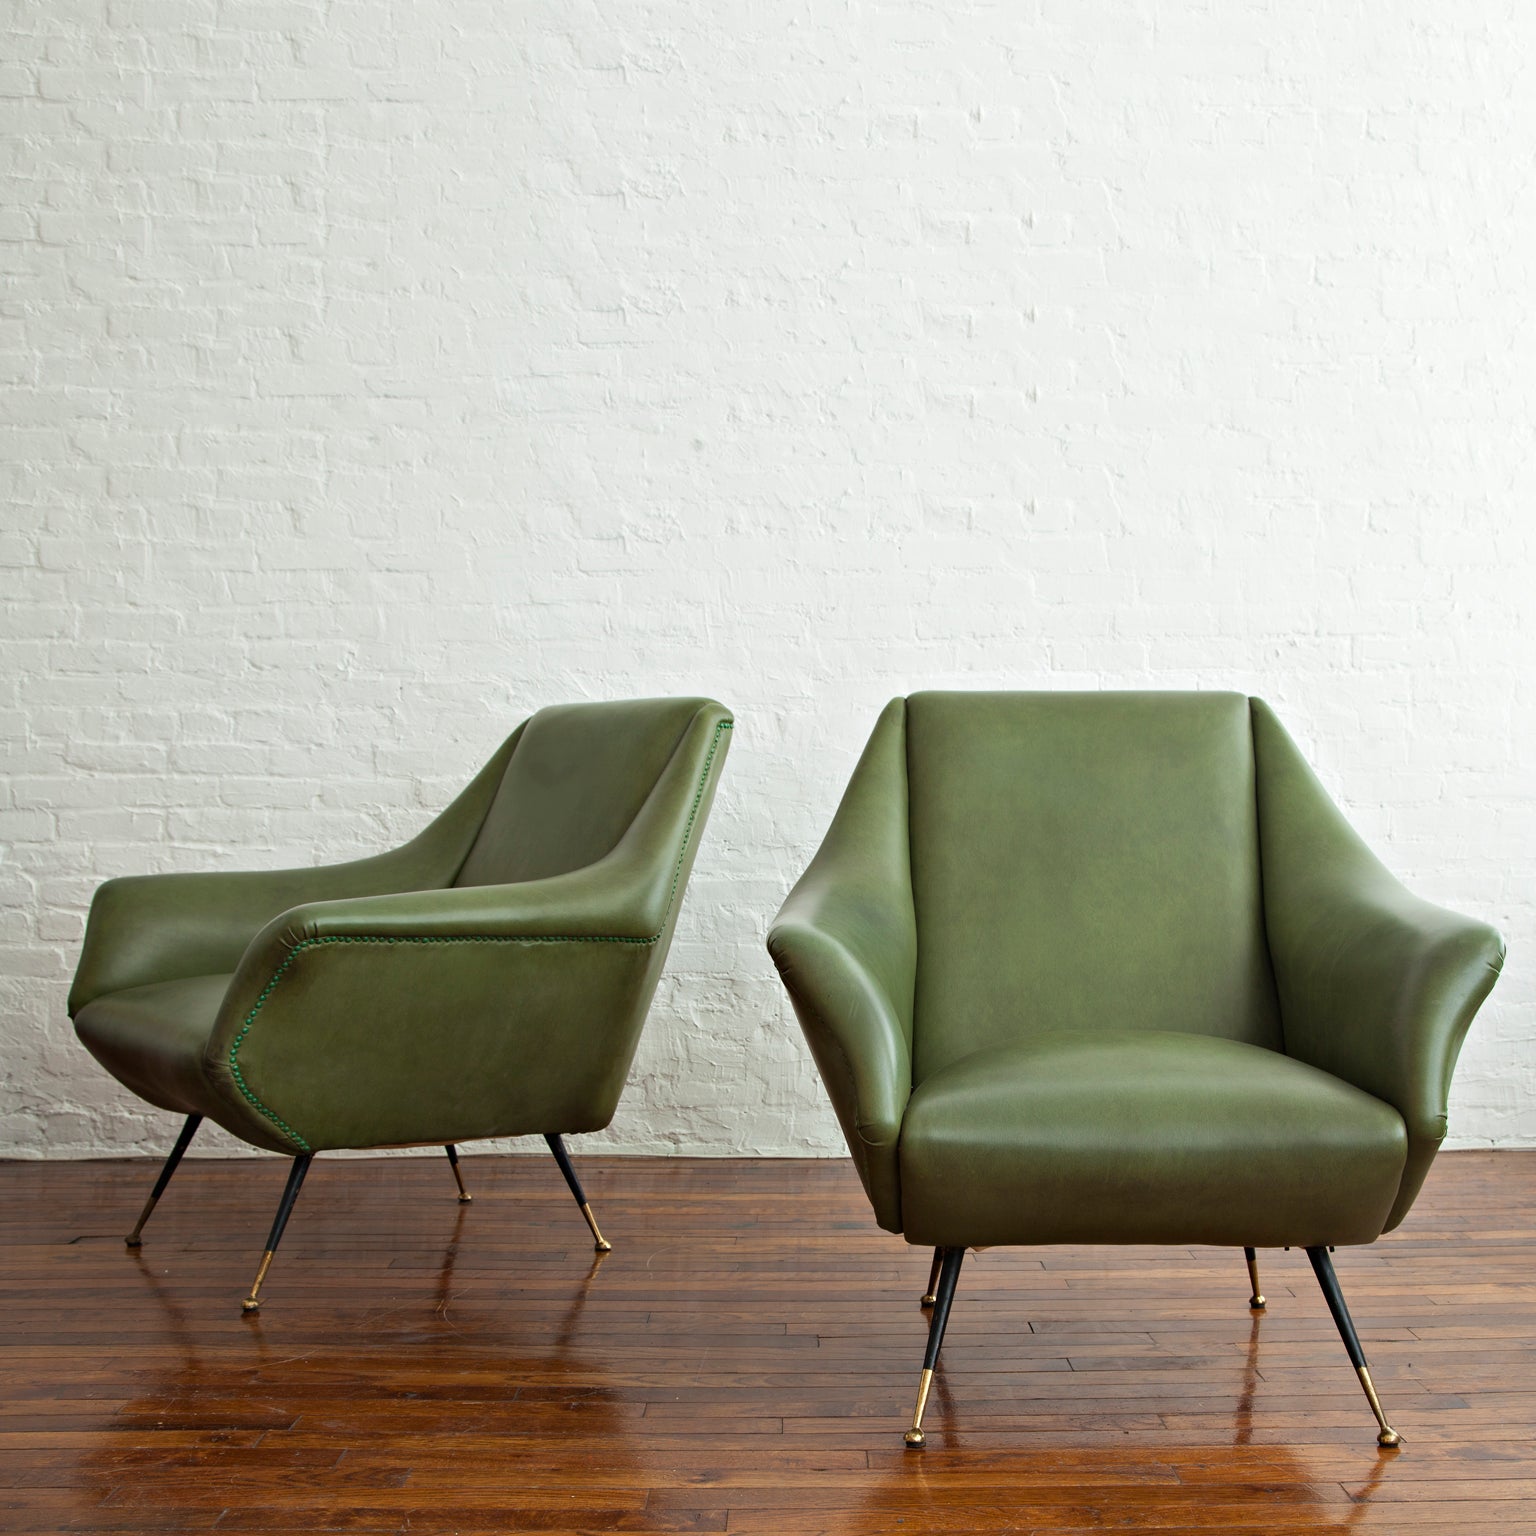 Pair of Lounge Chairs by Gio Ponti